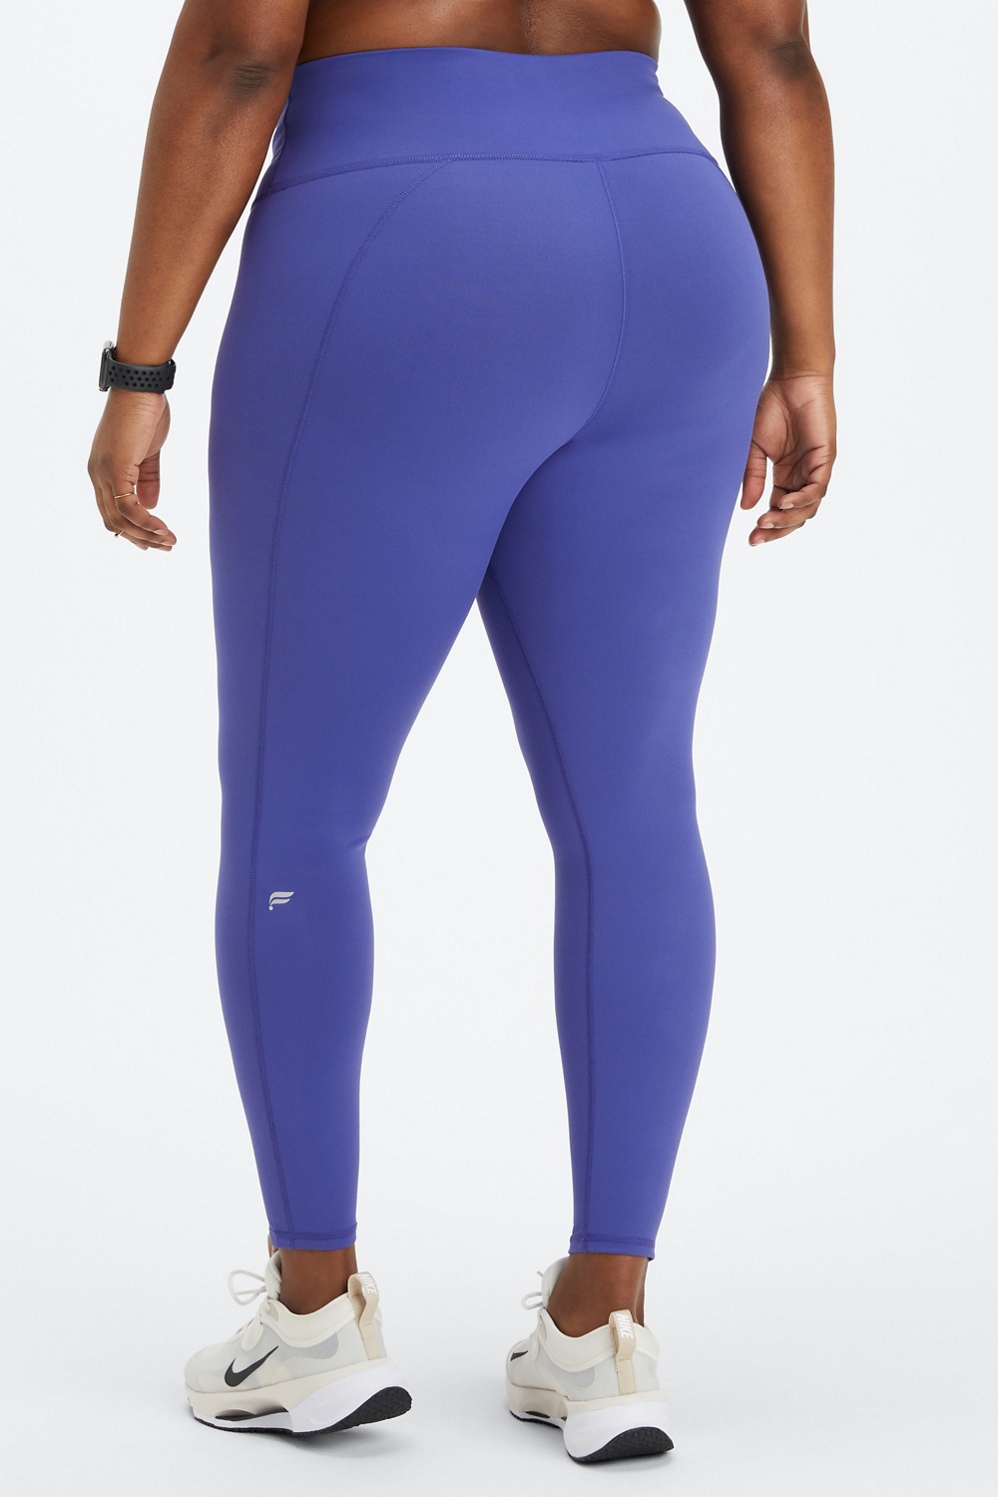 Replying to @Tortally_Ours Fabletics powerhold are some of my